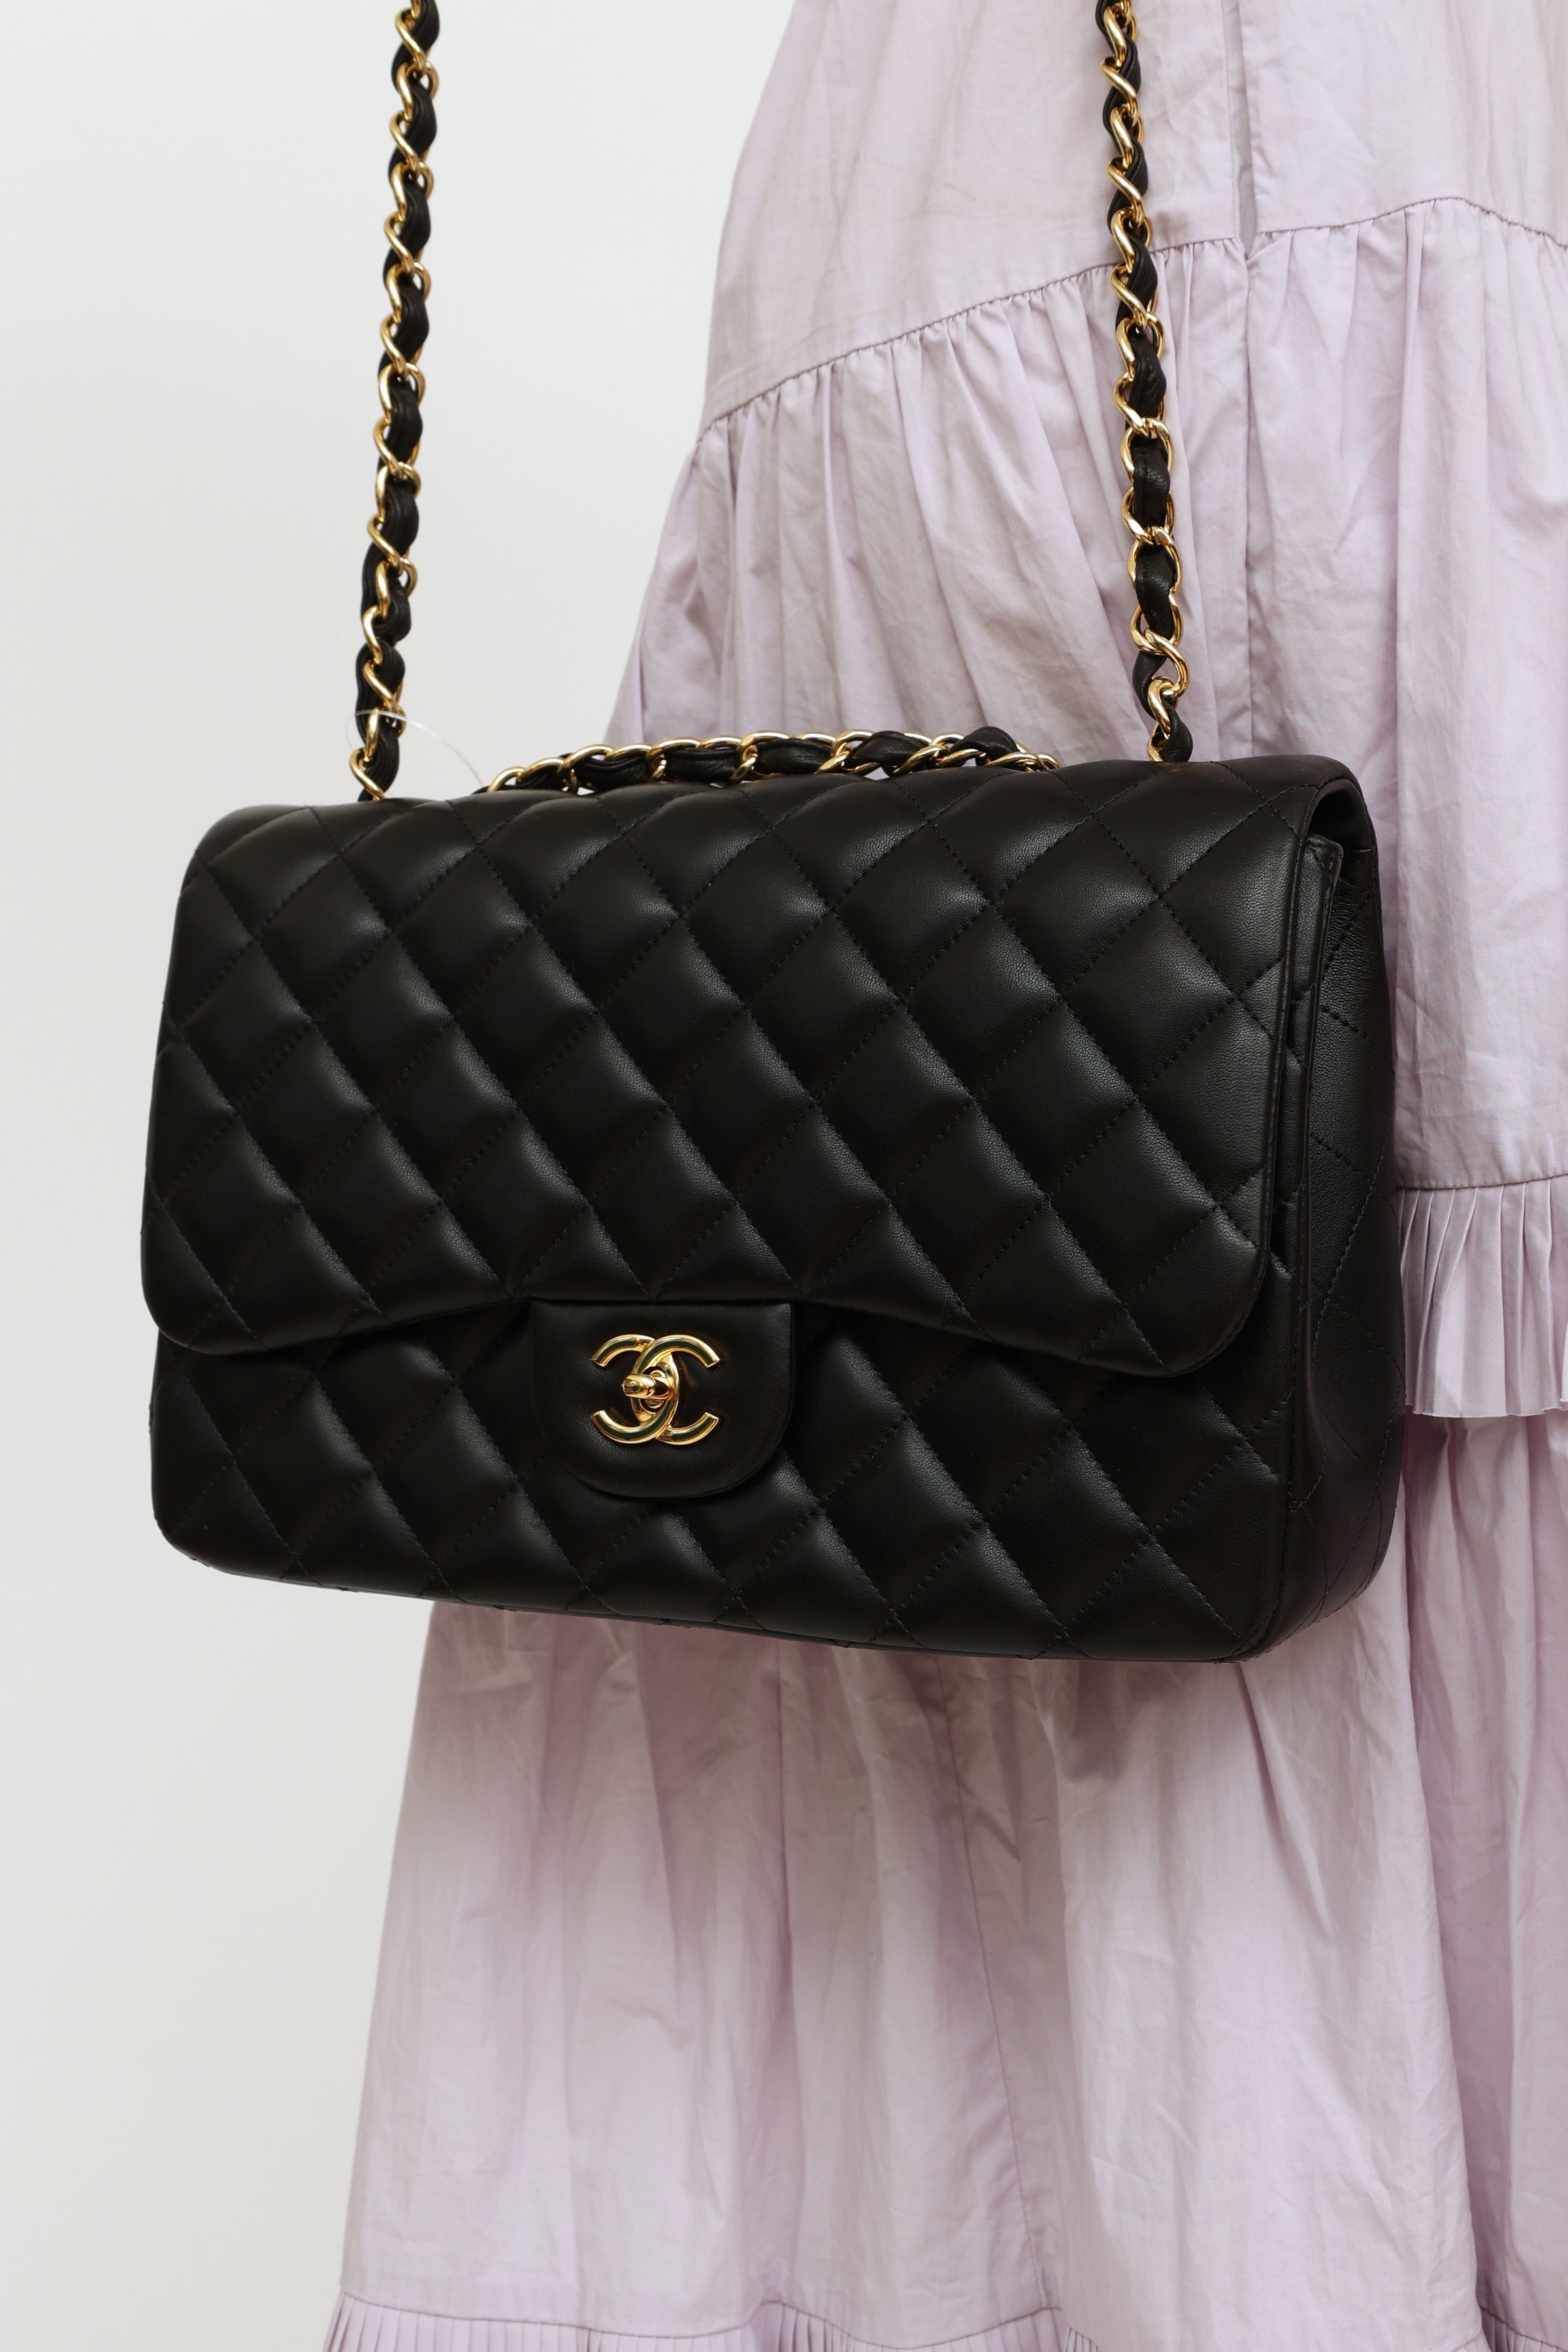 Chanel Quilted Flap Bag, Black  Costco - 北美省钱快报折扣爆料